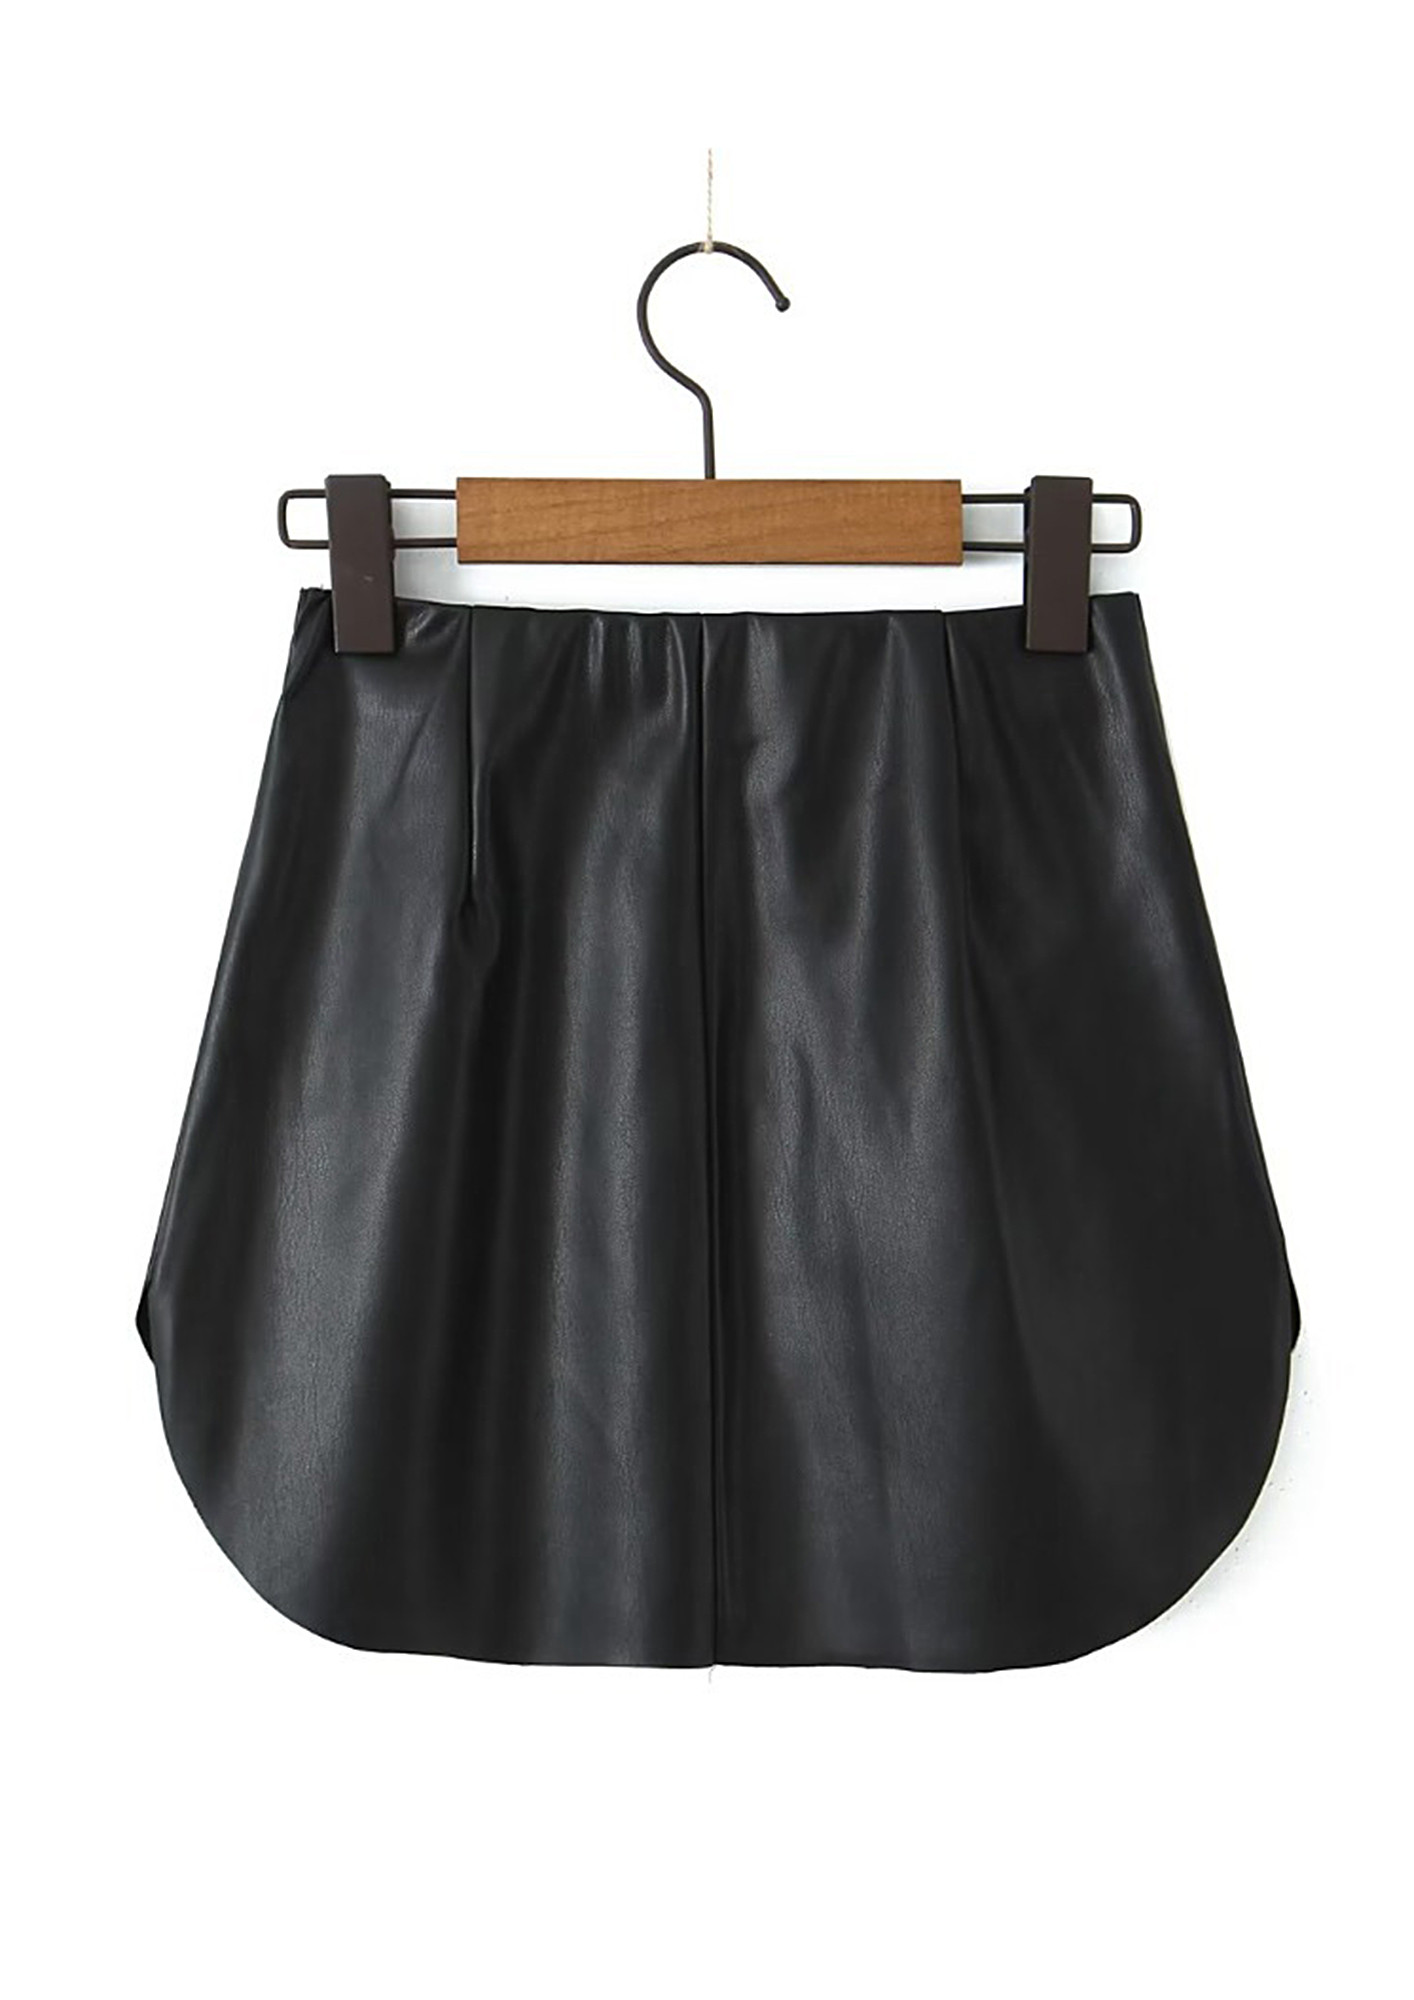 Ladies Faux Leather Skirts, PU Skirts, Black Leather Skirts